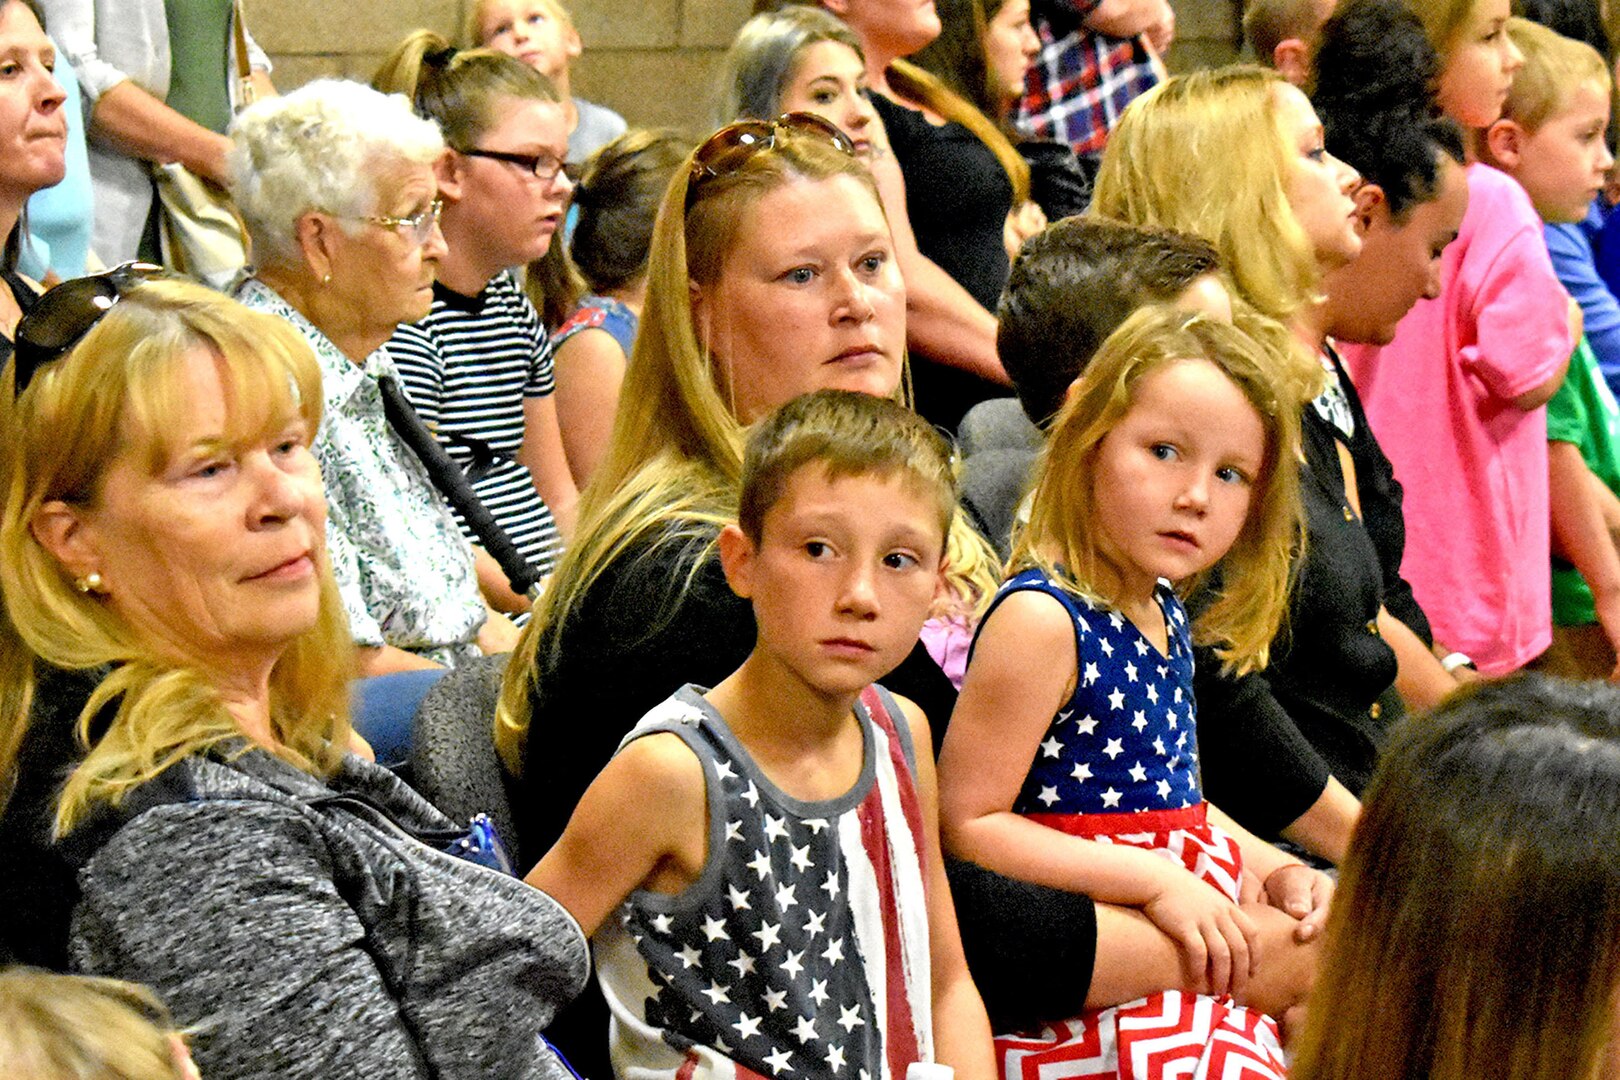 Young children and parents are seated as members in an audience.